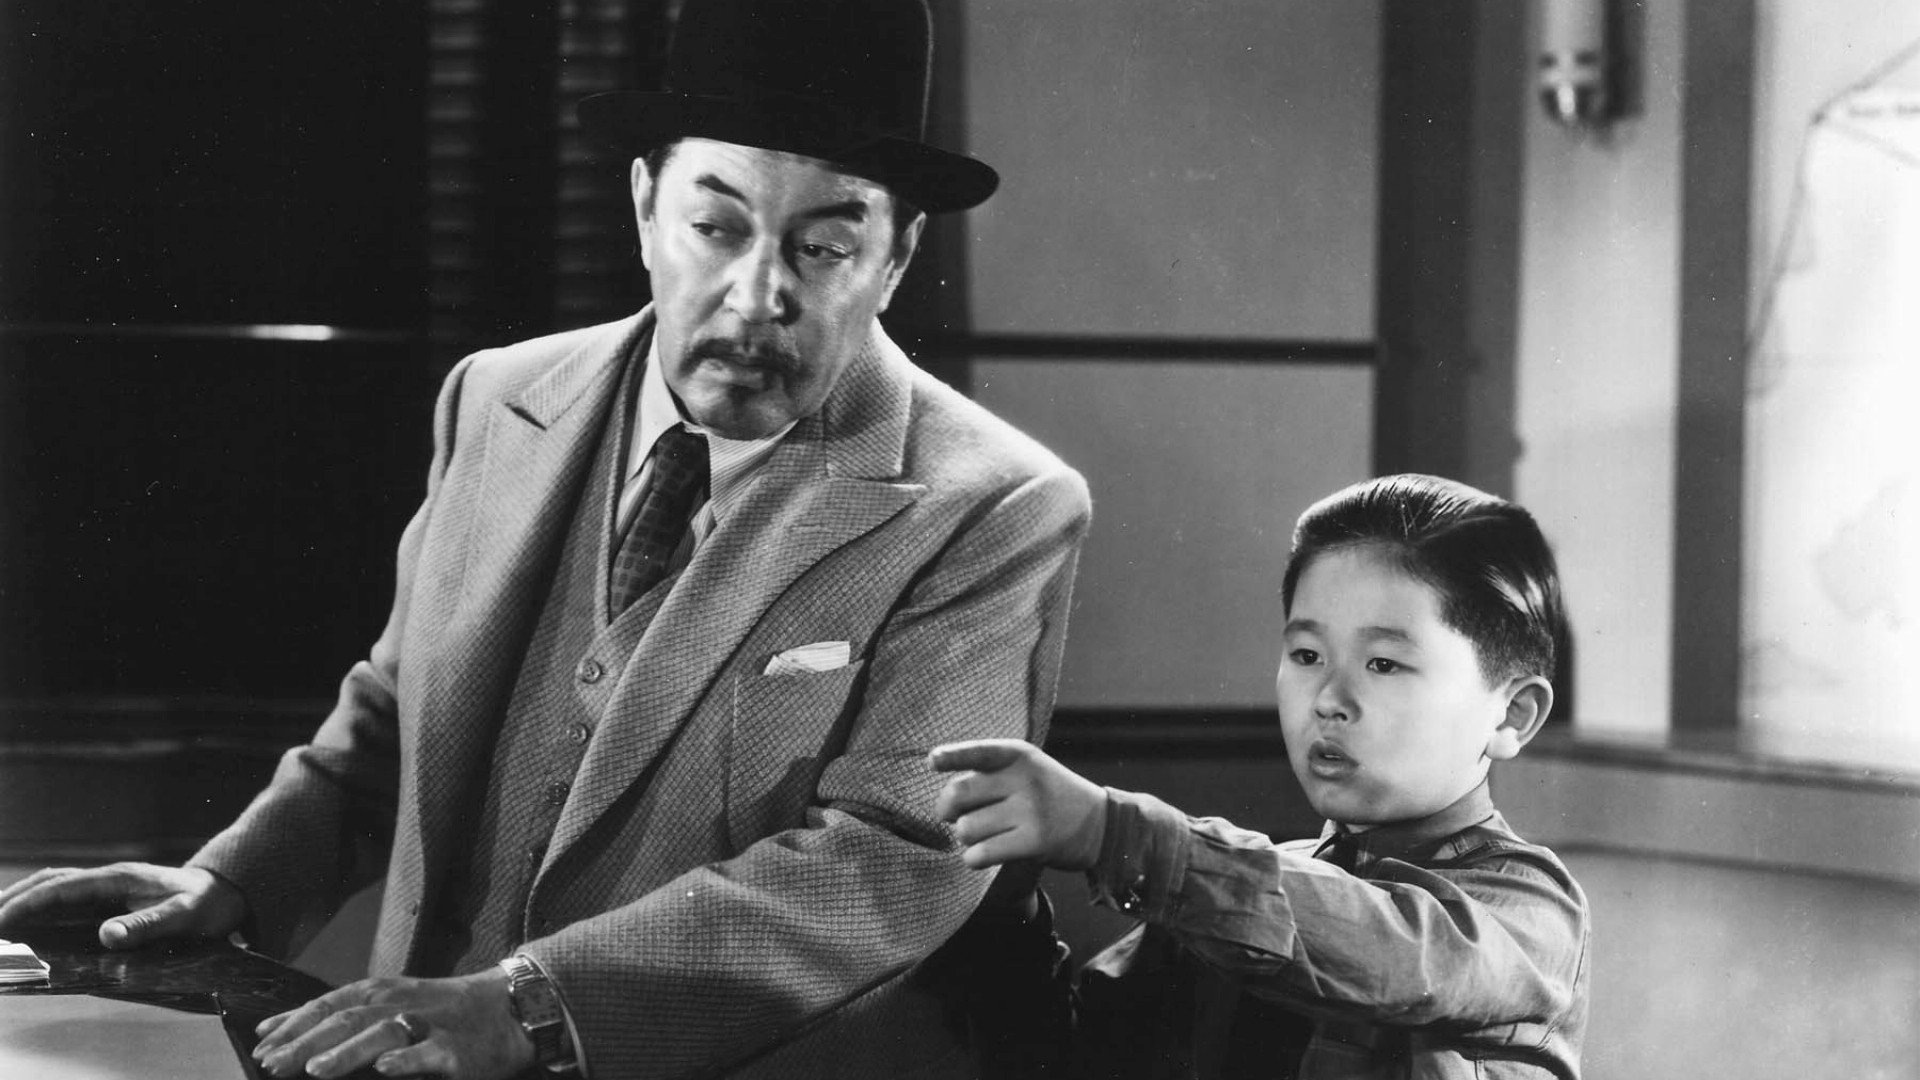 Charlie Chan at the Olympics